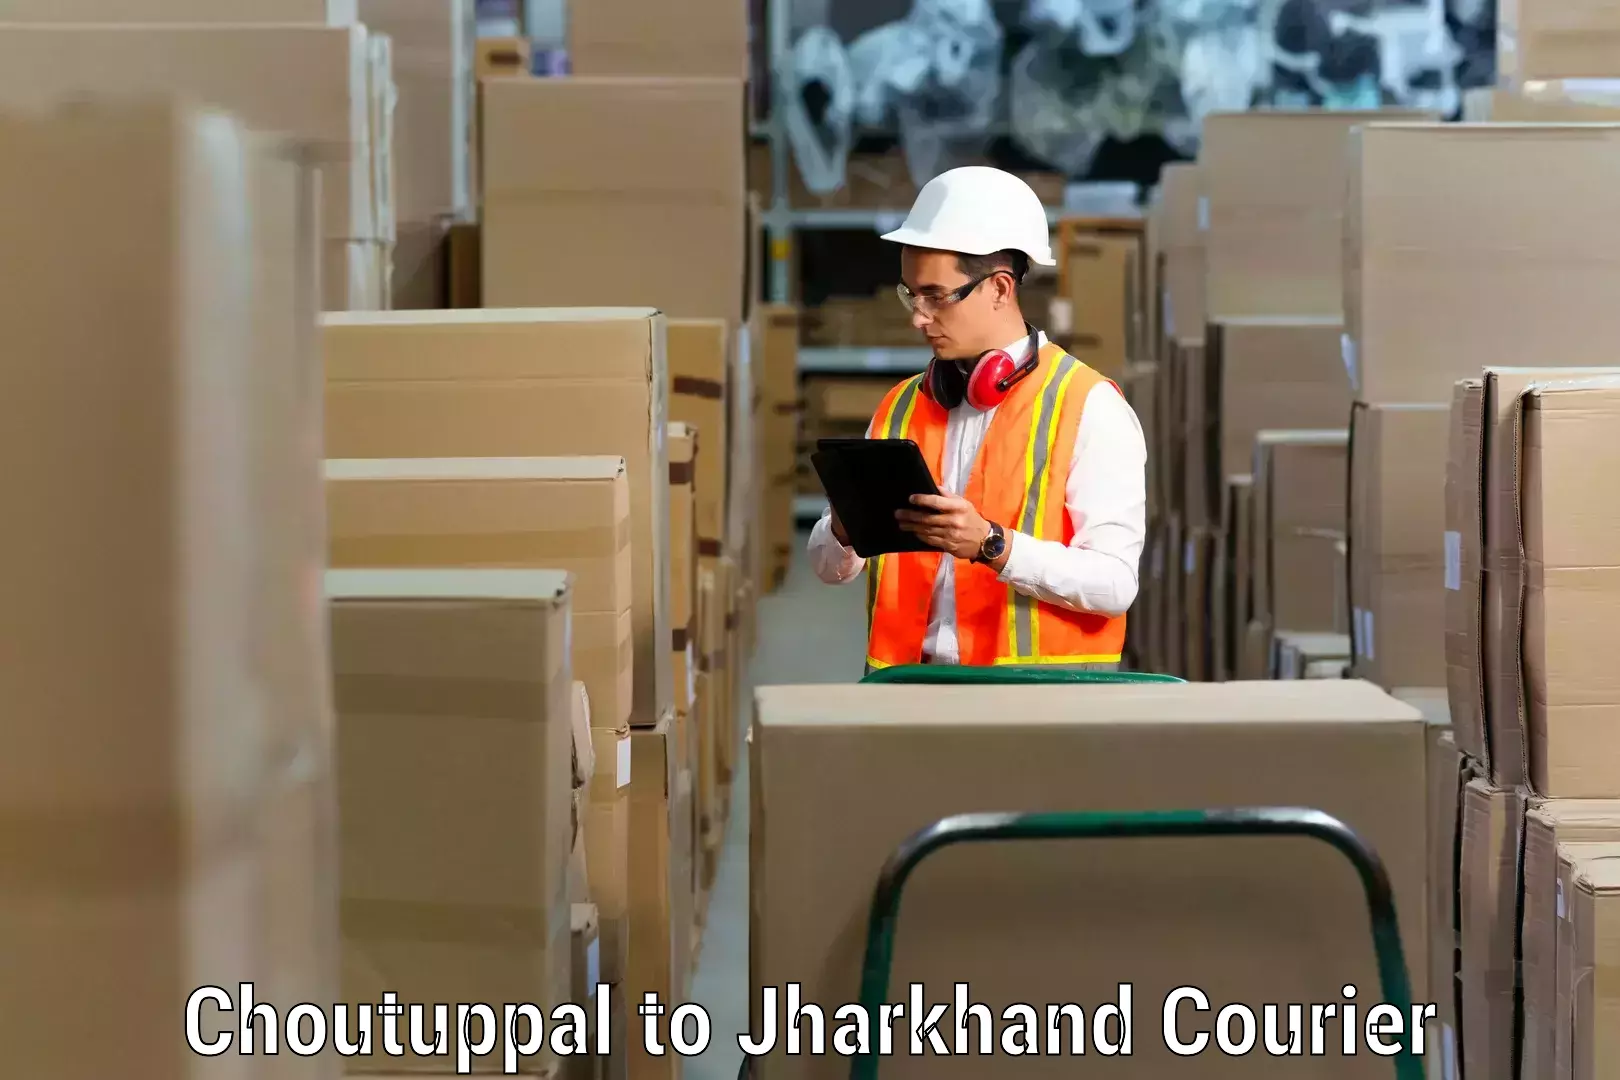 Furniture transport specialists Choutuppal to Ranchi